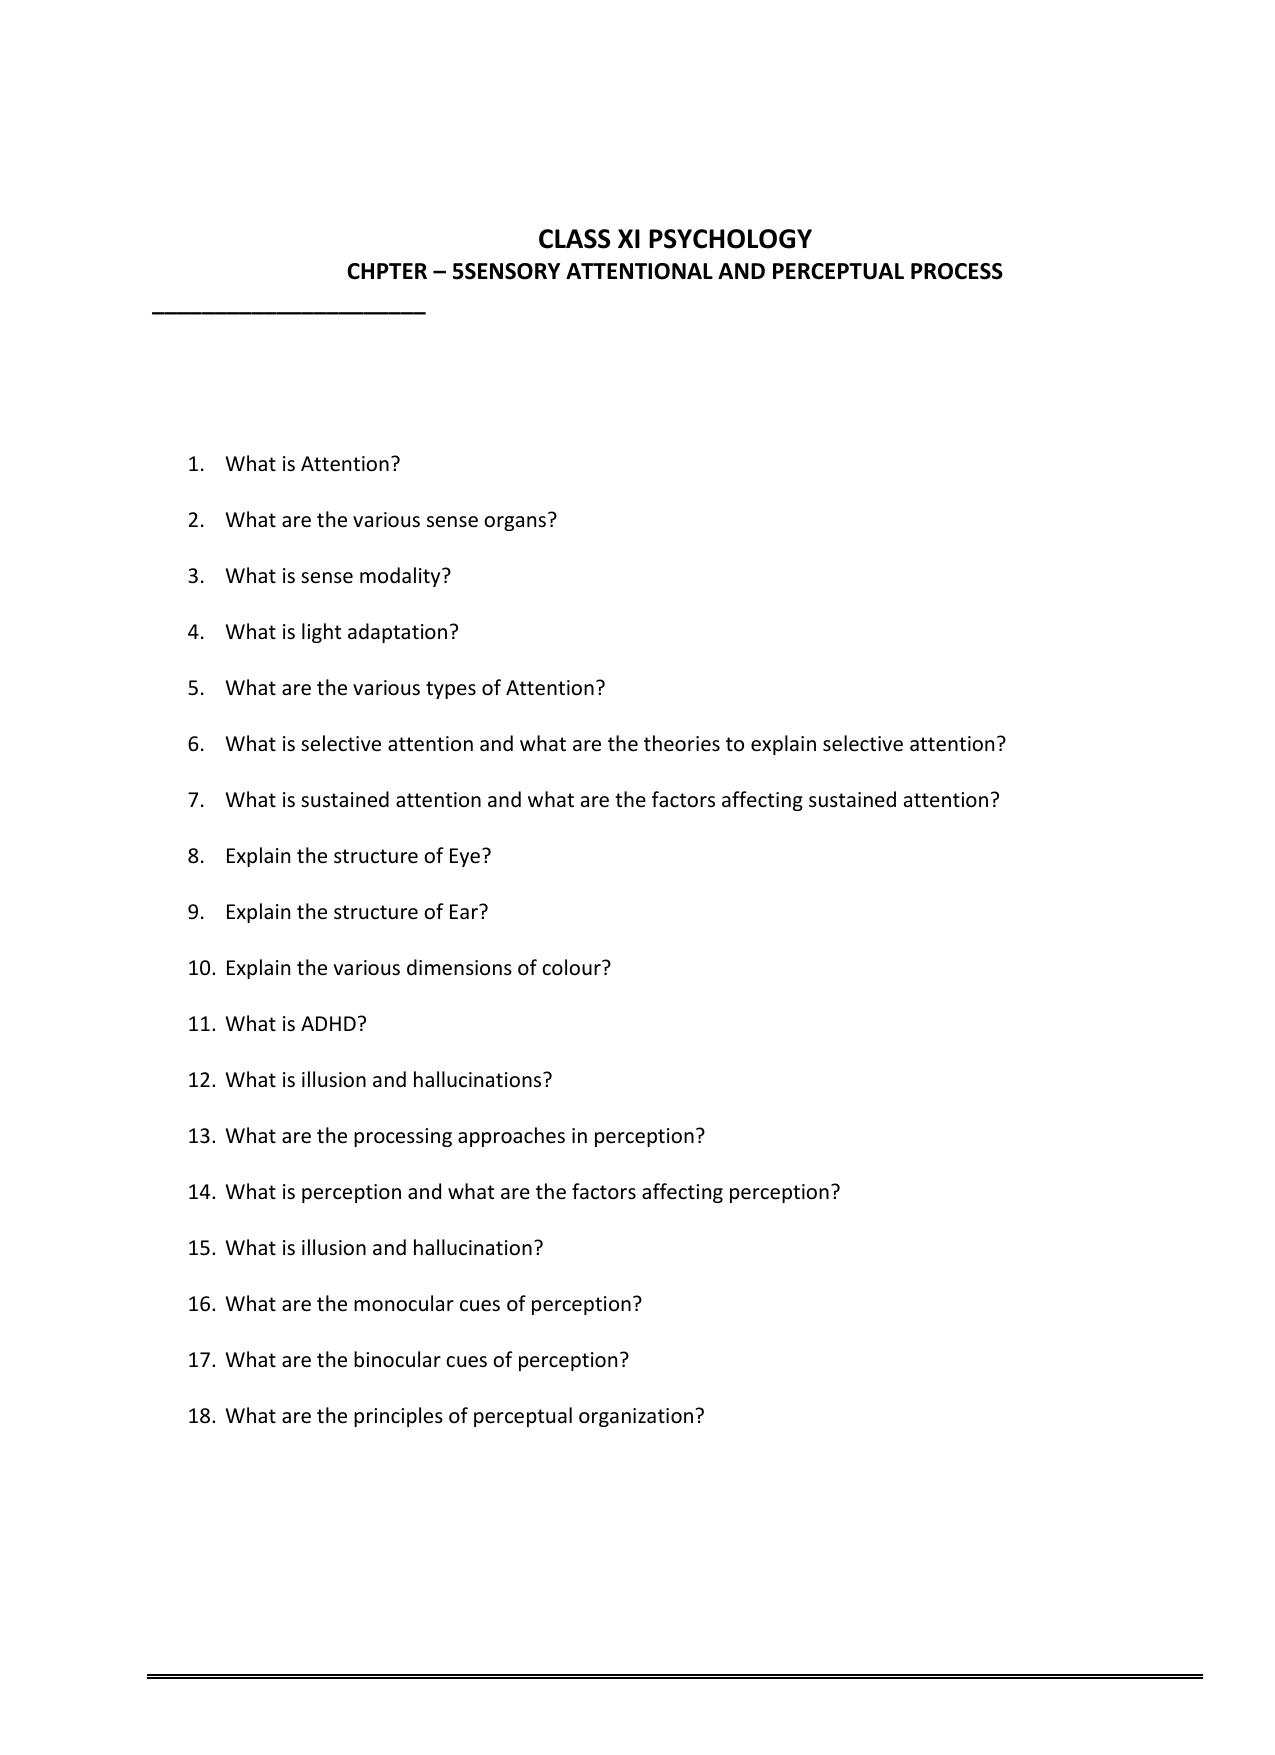 CBSE Worksheets for Class 11 Psychology Sensory Attentional and Perceptual Process Assignment 1 - Page 1